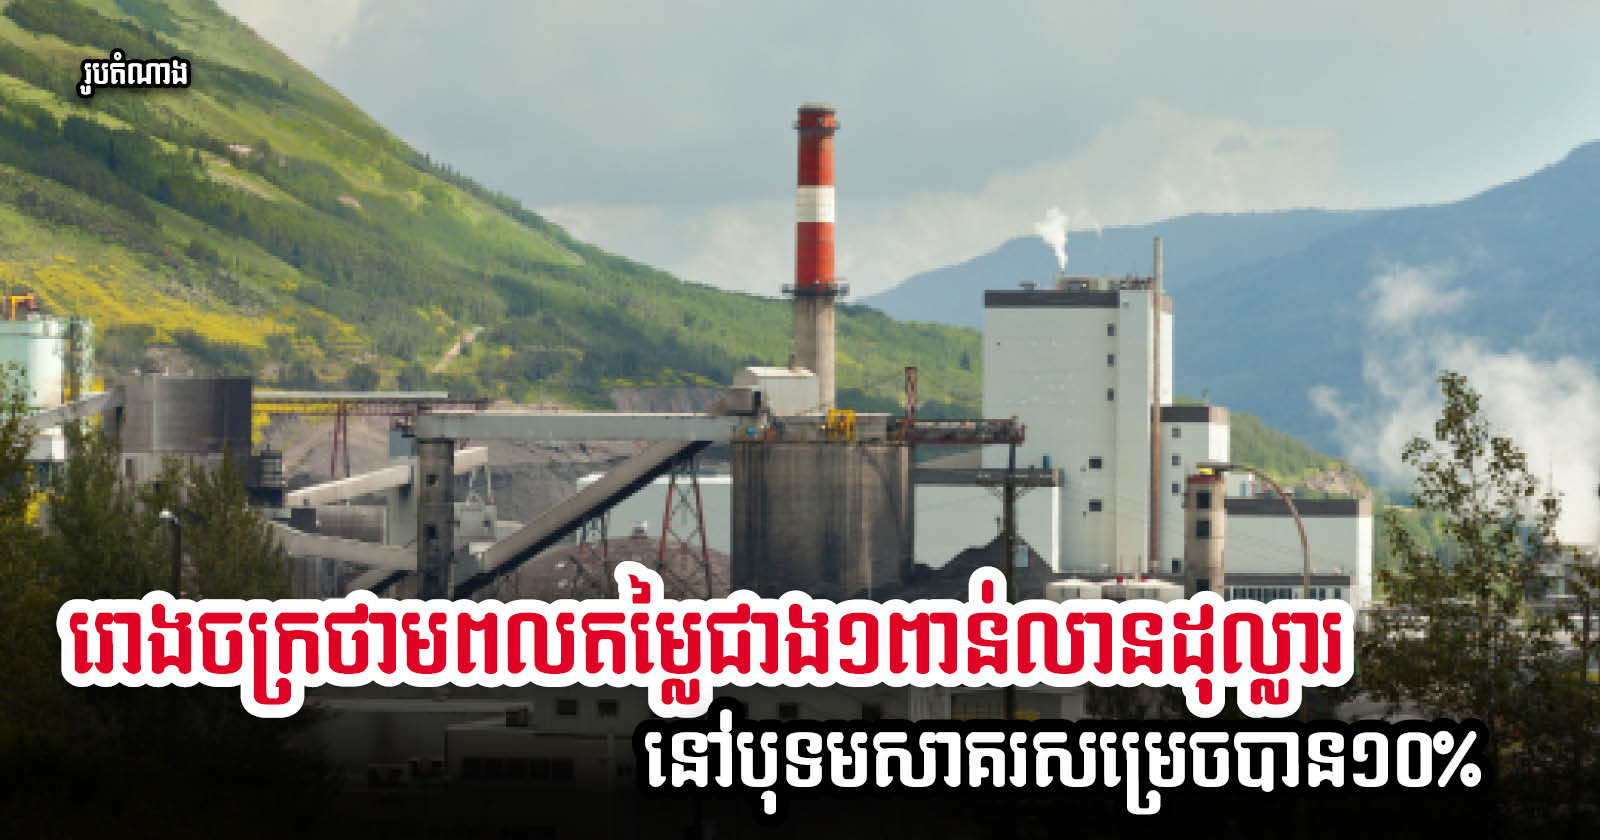 Construction of 700-megawatt Coal-Fired Power Plant in Koh Kong 10% Complete